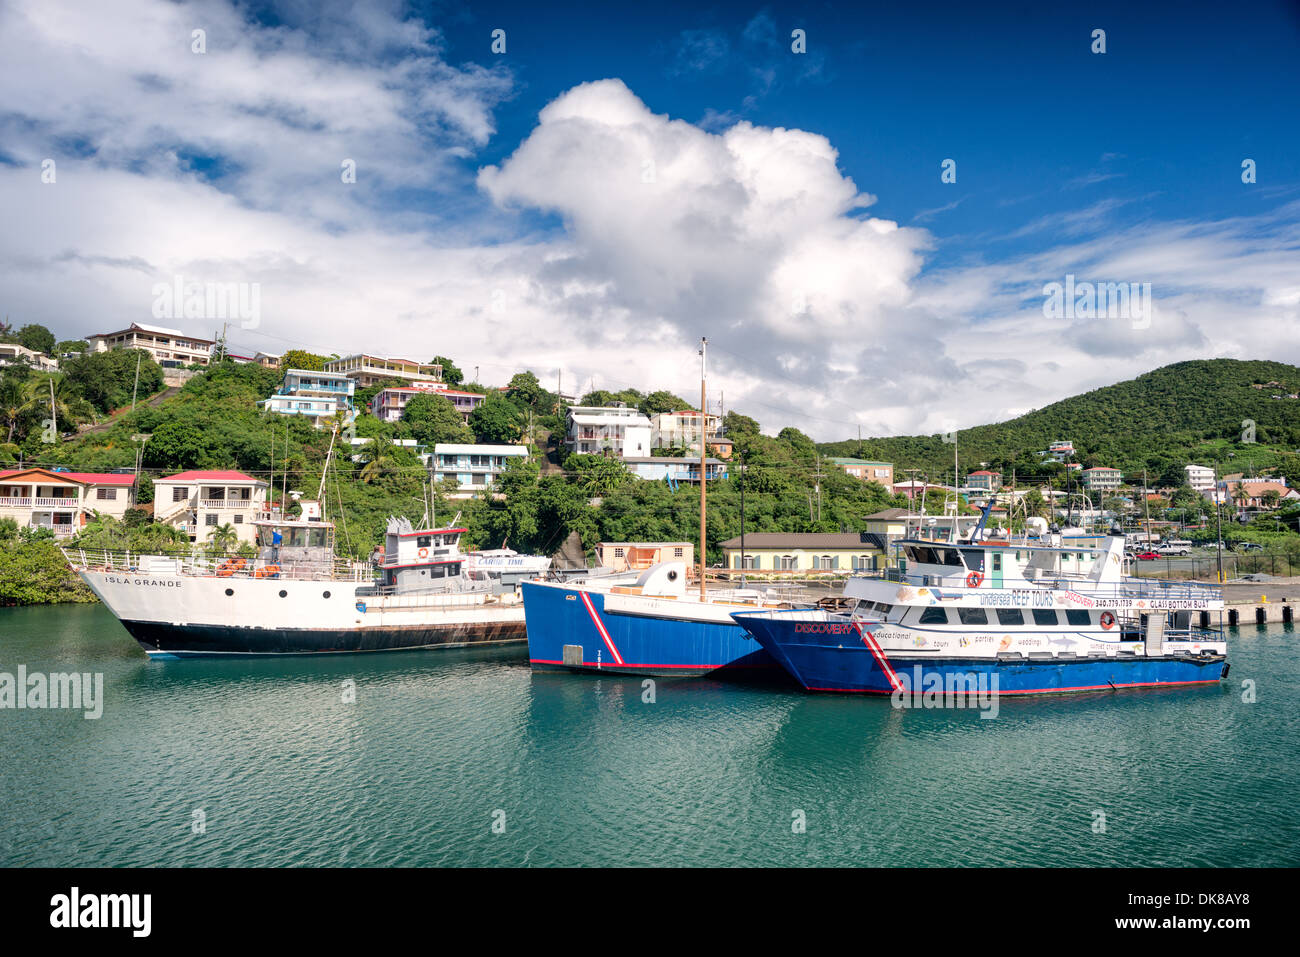 The marina at Enighed Pond on St John in the US Virgin Islands. The marina is suitable for the car ferries that operate between St John and St Thomas as well as other larger commercial boats. Stock Photo